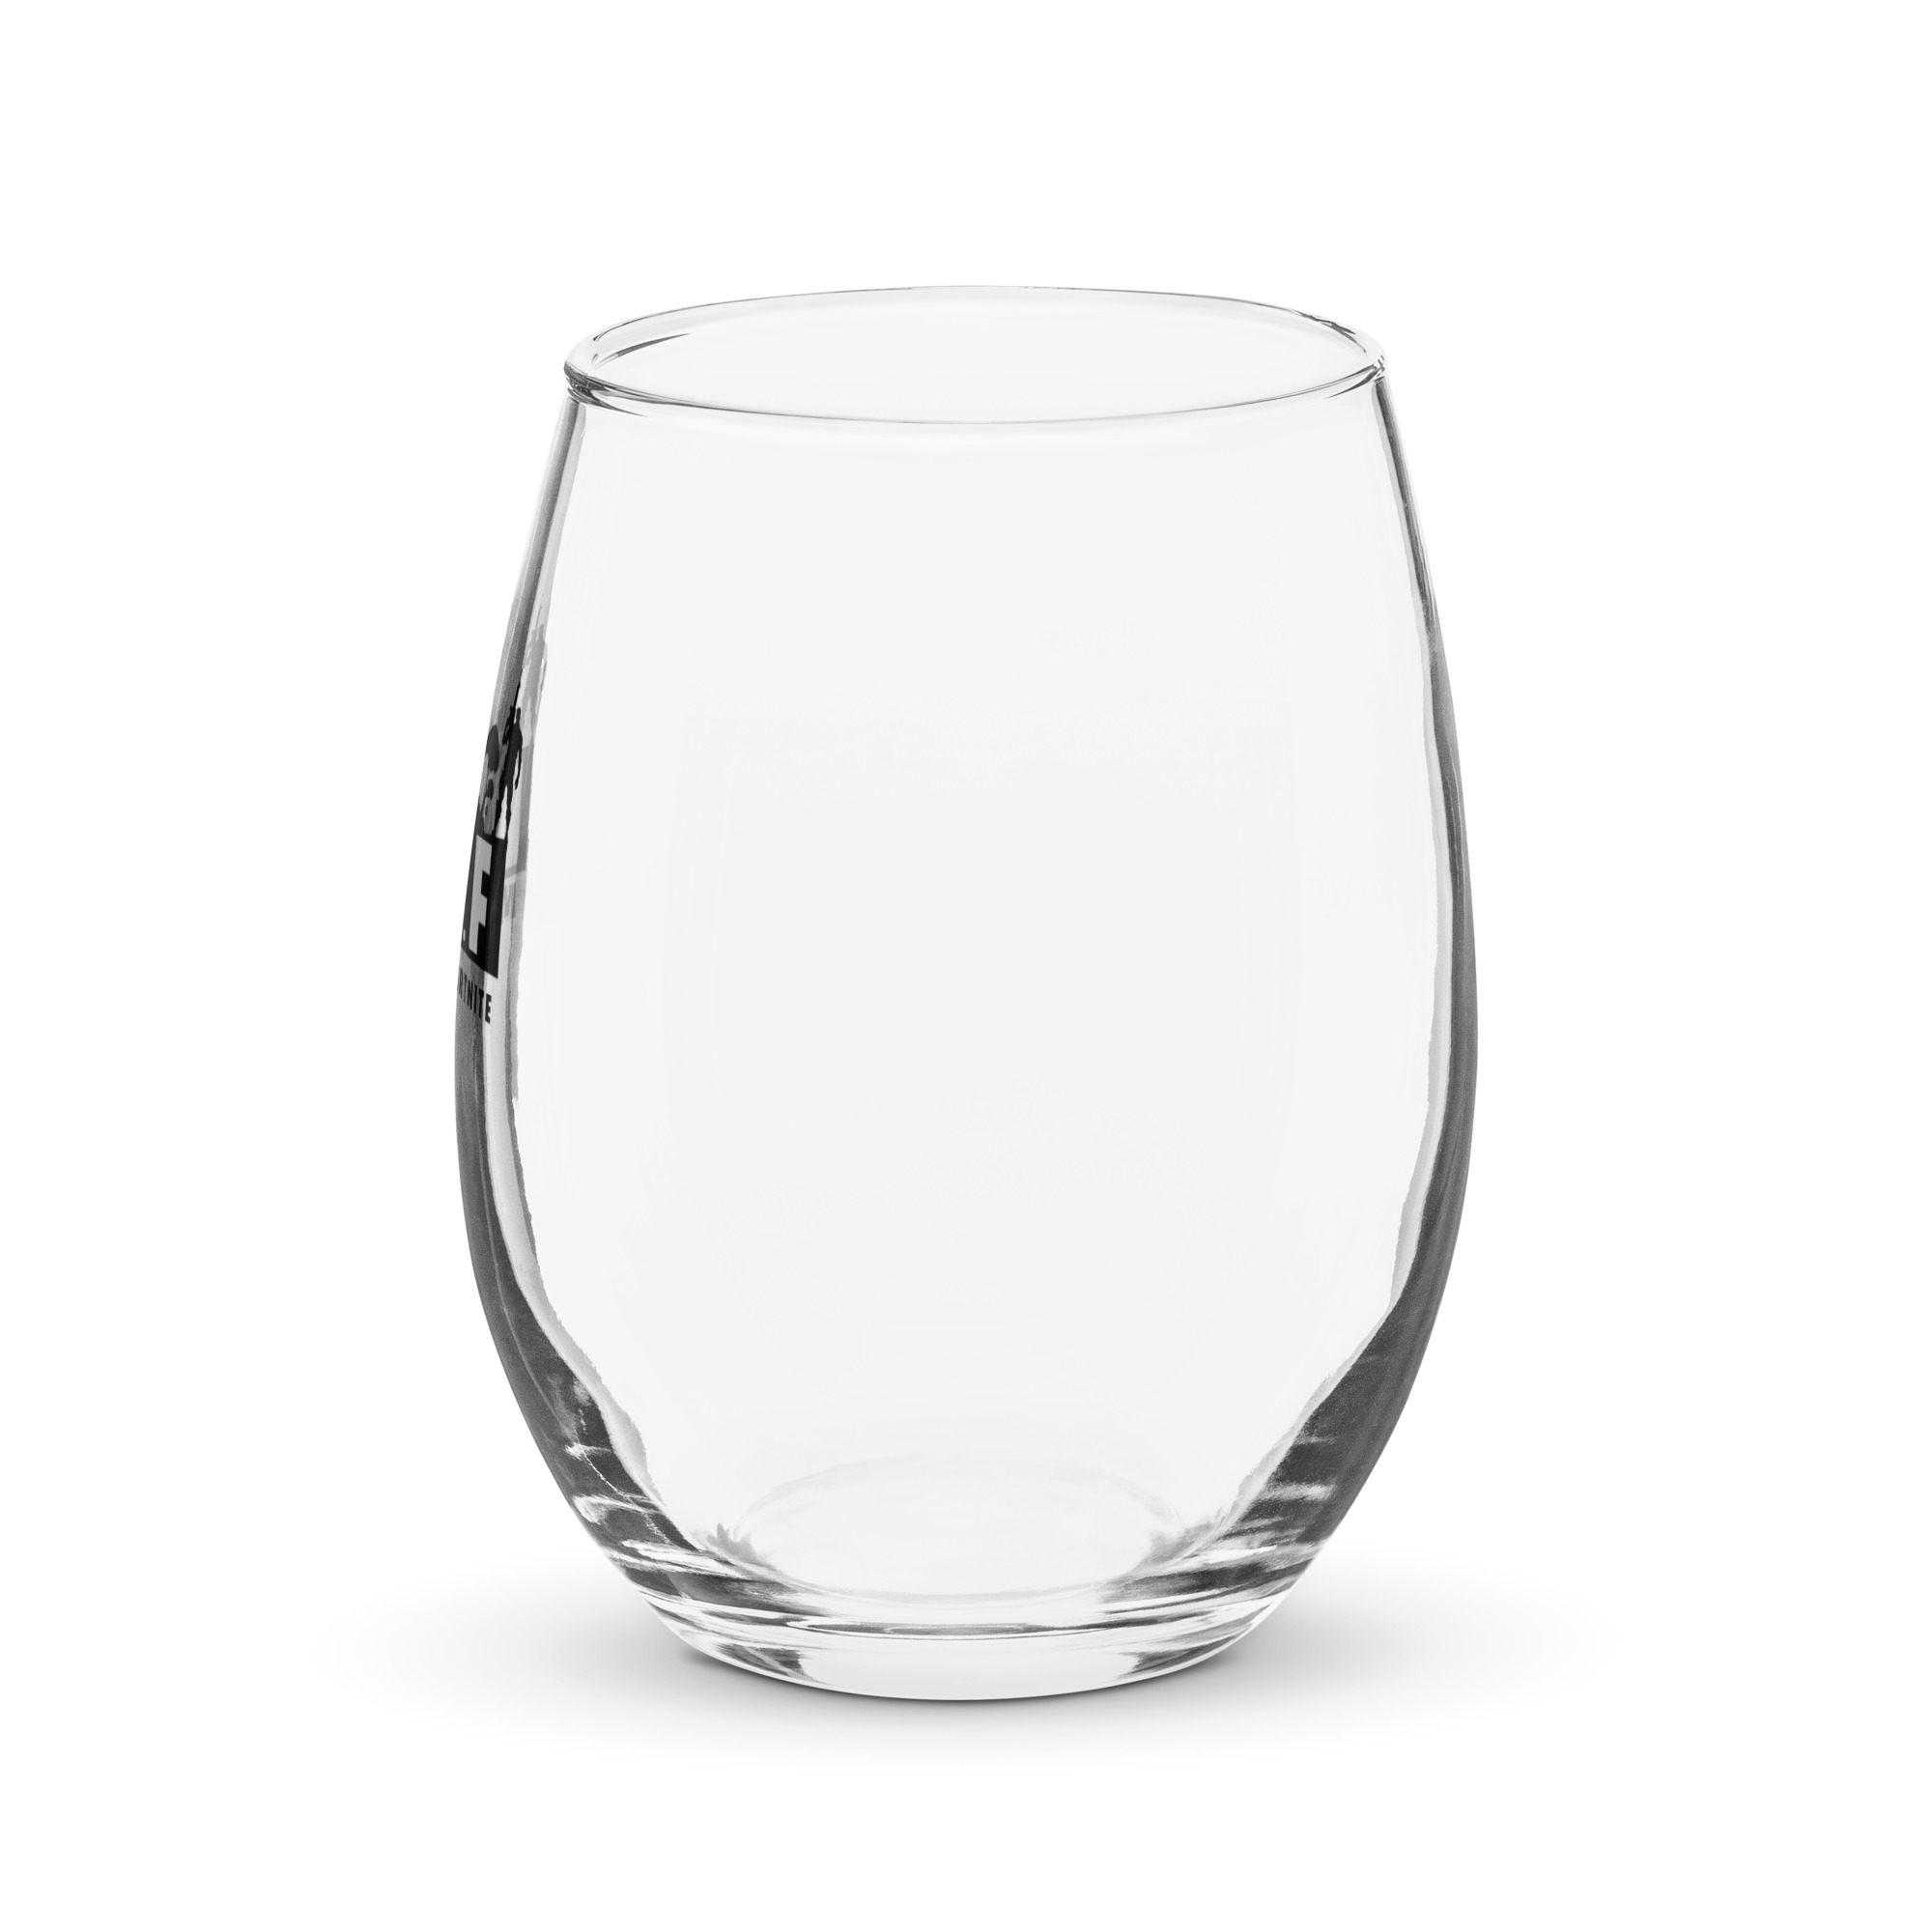 Behind every successful woman is herself 15oz Stemless Wine Glass – Fly  Paper Products